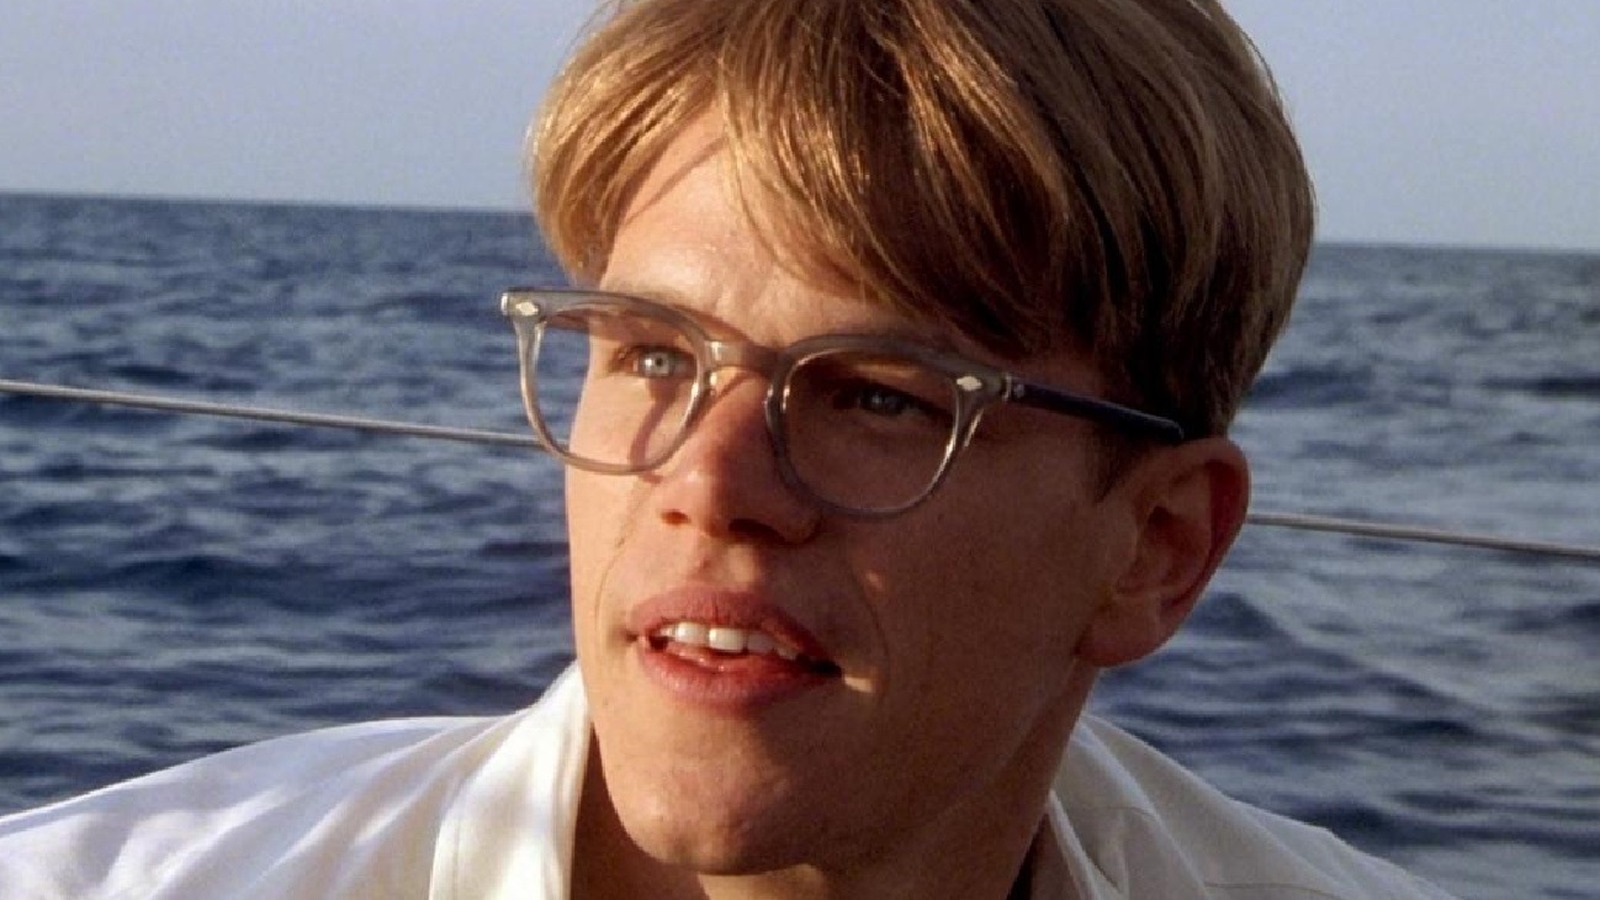 How Every Element in the Final Sequence from 'The Talented Mr. Ripley'  Works To Create A Wonderfully Disturbing Finale